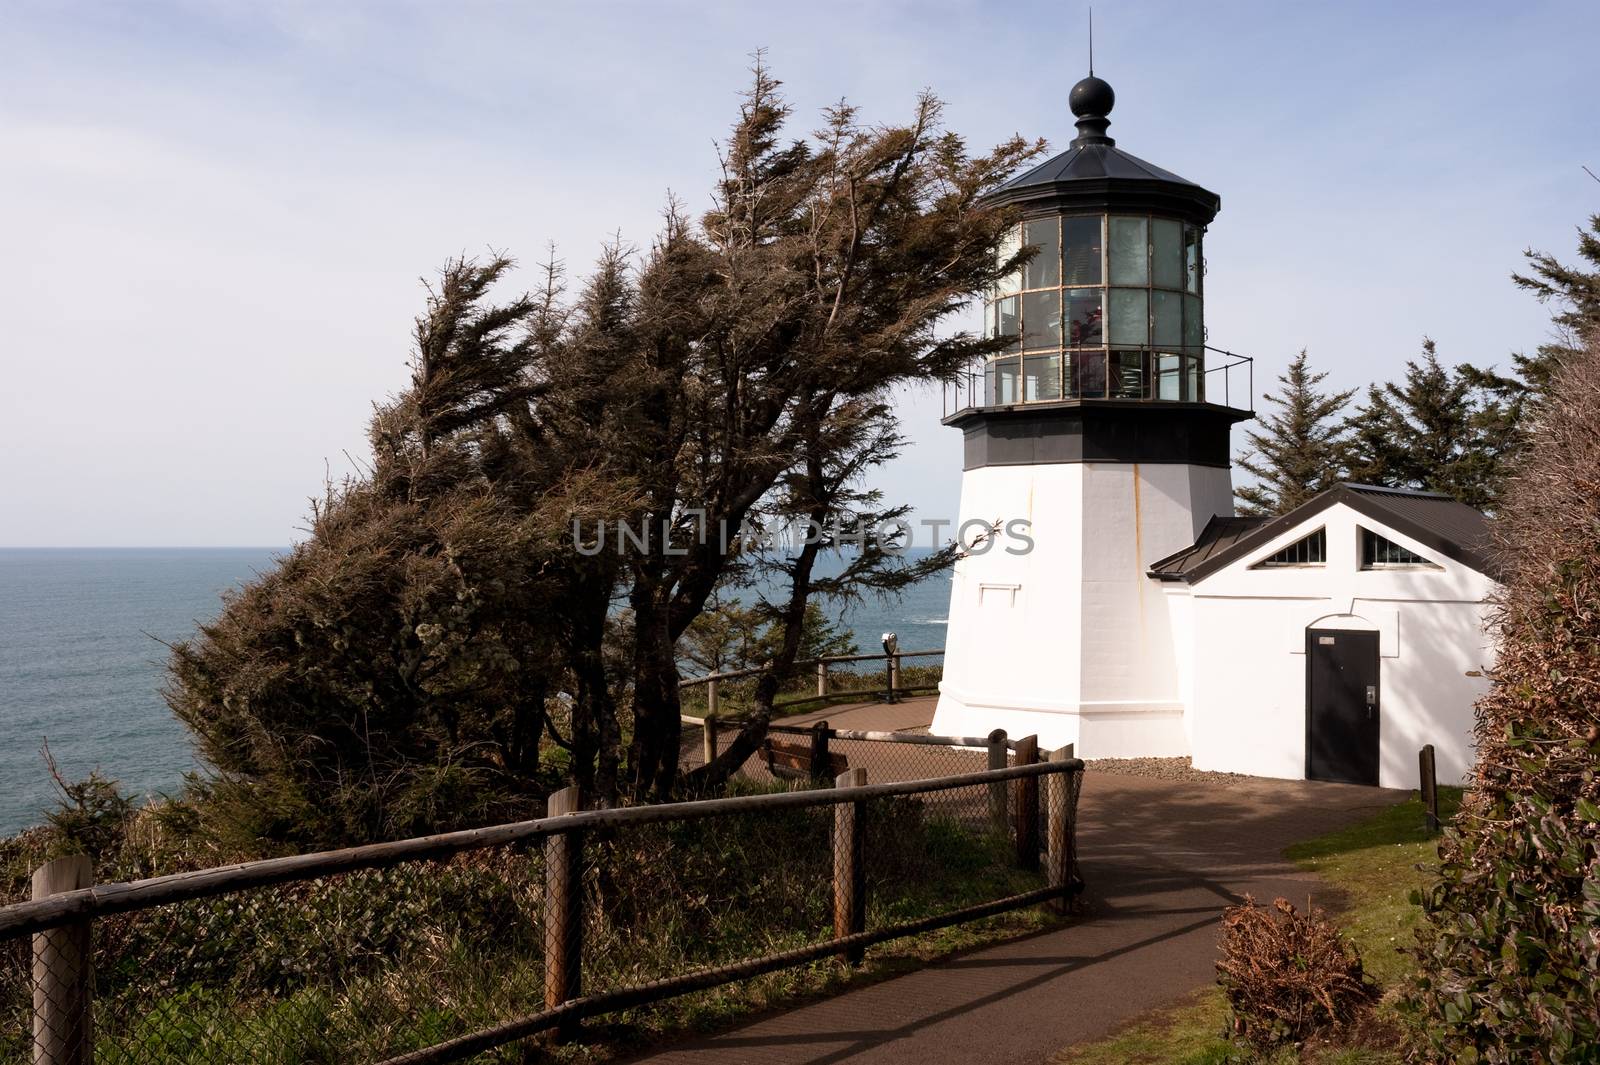 Cape Mears Lighthouse Pacific West Coast Oregon United States by ChrisBoswell